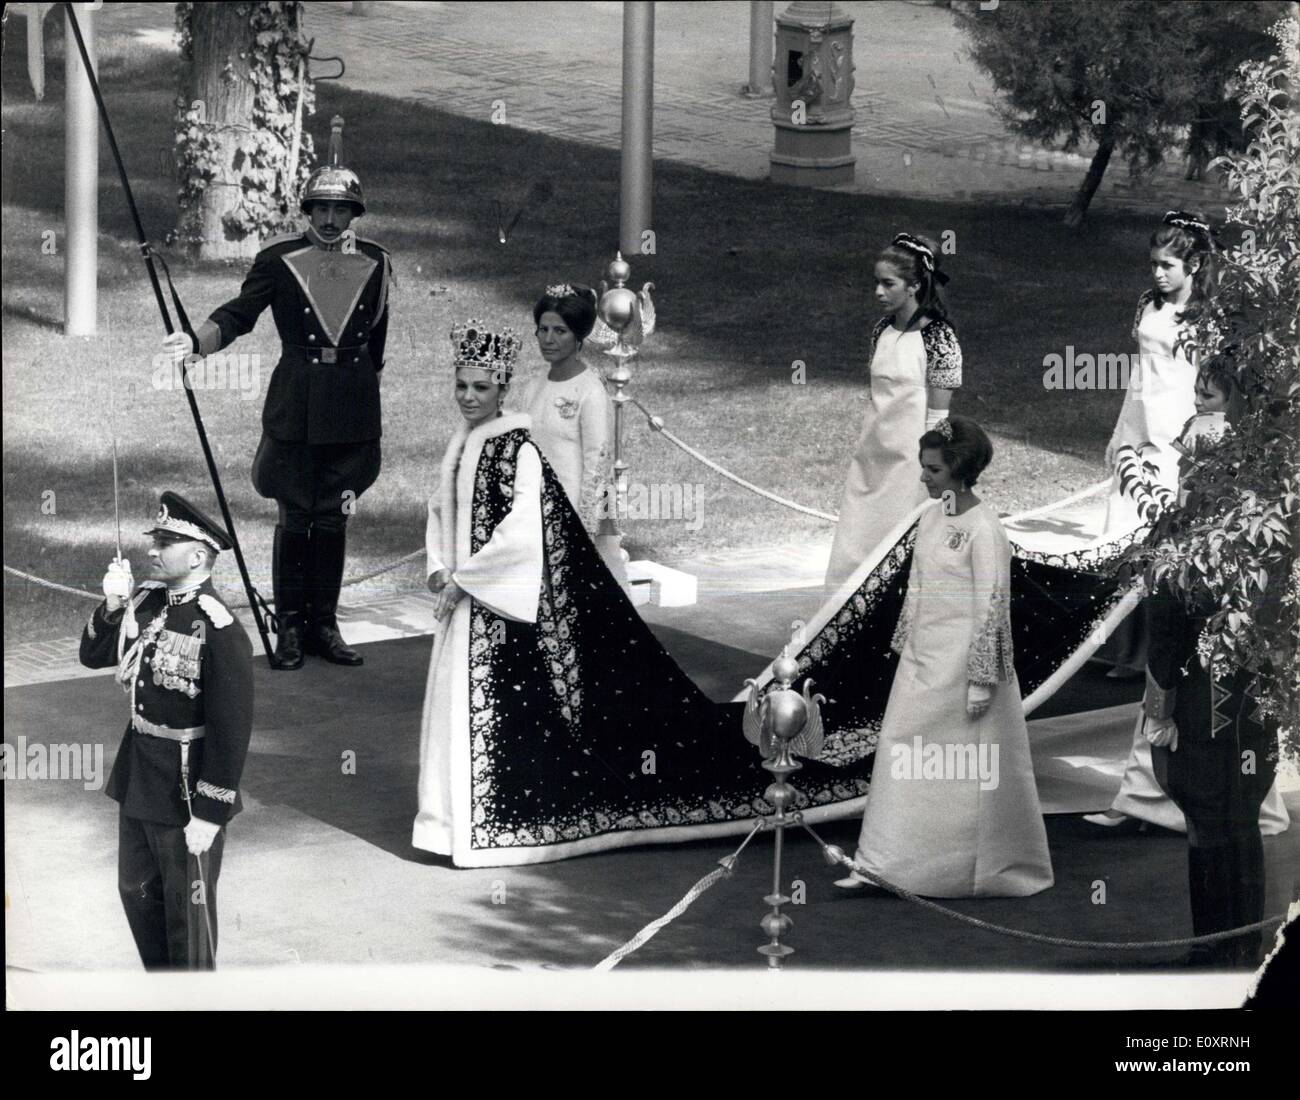 Oct. 27, 1967 - The Shah of Iran crowned in Bejewelled splendour at his coronation ceremony in Teheran.: Yesterday Iran had a dignified, rich and popular coronation - with the Shah placing the crown on his own head at the ceremony at Golestan Palace in Teheran. He also crowned Queen Farah making her the first woman to wear a crown in the country's 2,500-year history. The ceremony was watched by the young Crown Prince Reza, who sat at his father's side Stock Photo